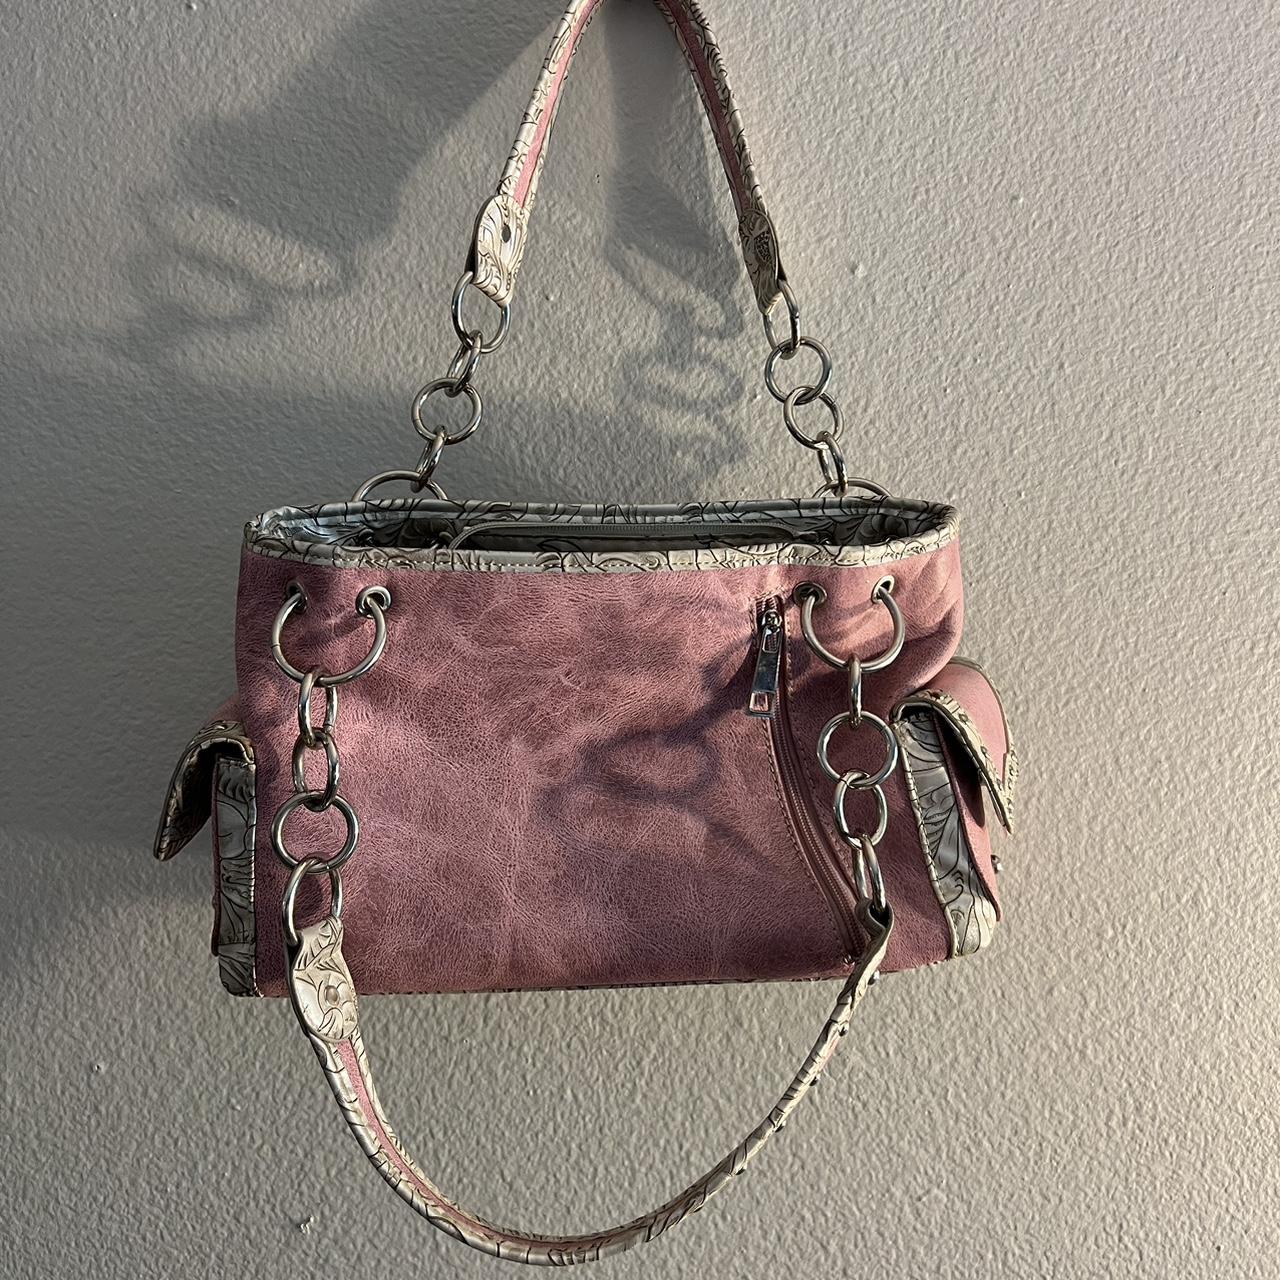 Country Road Women's Pink and Silver Bag (2)